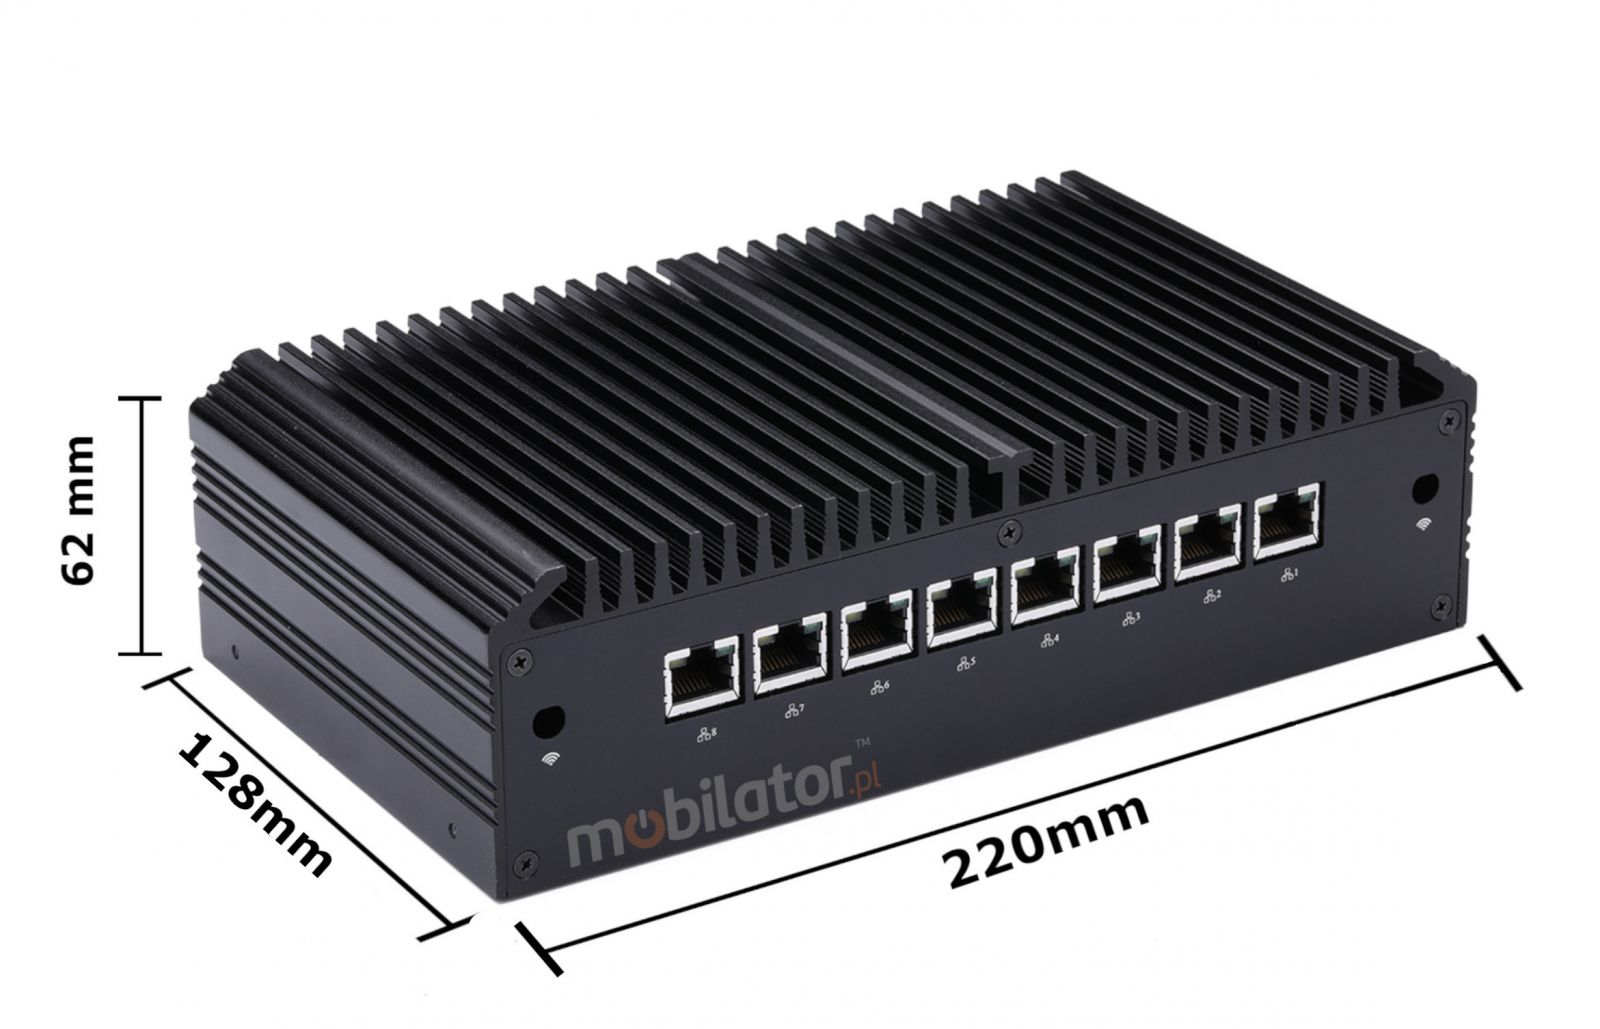 compact size of the industrial MiniPC Q1012GE